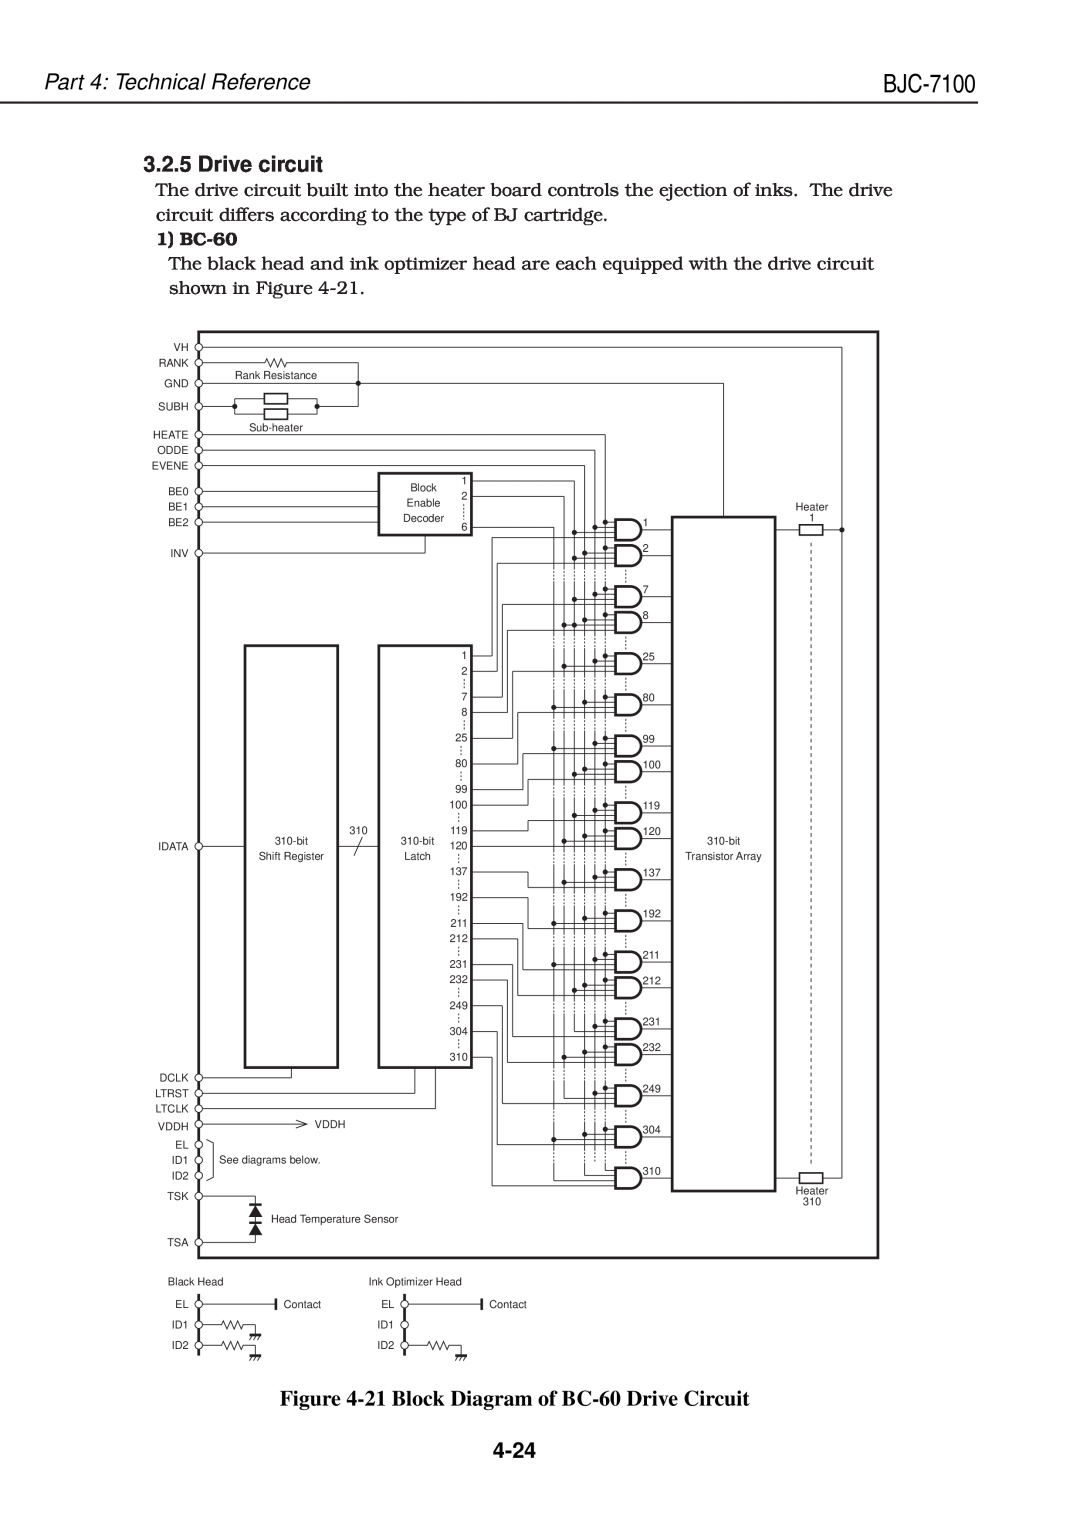 Canon QY8-1360-000 Drive circuit, 21 Block Diagram of BC-60 Drive Circuit, 4-24, Part 4 Technical Reference, BJC-7100 